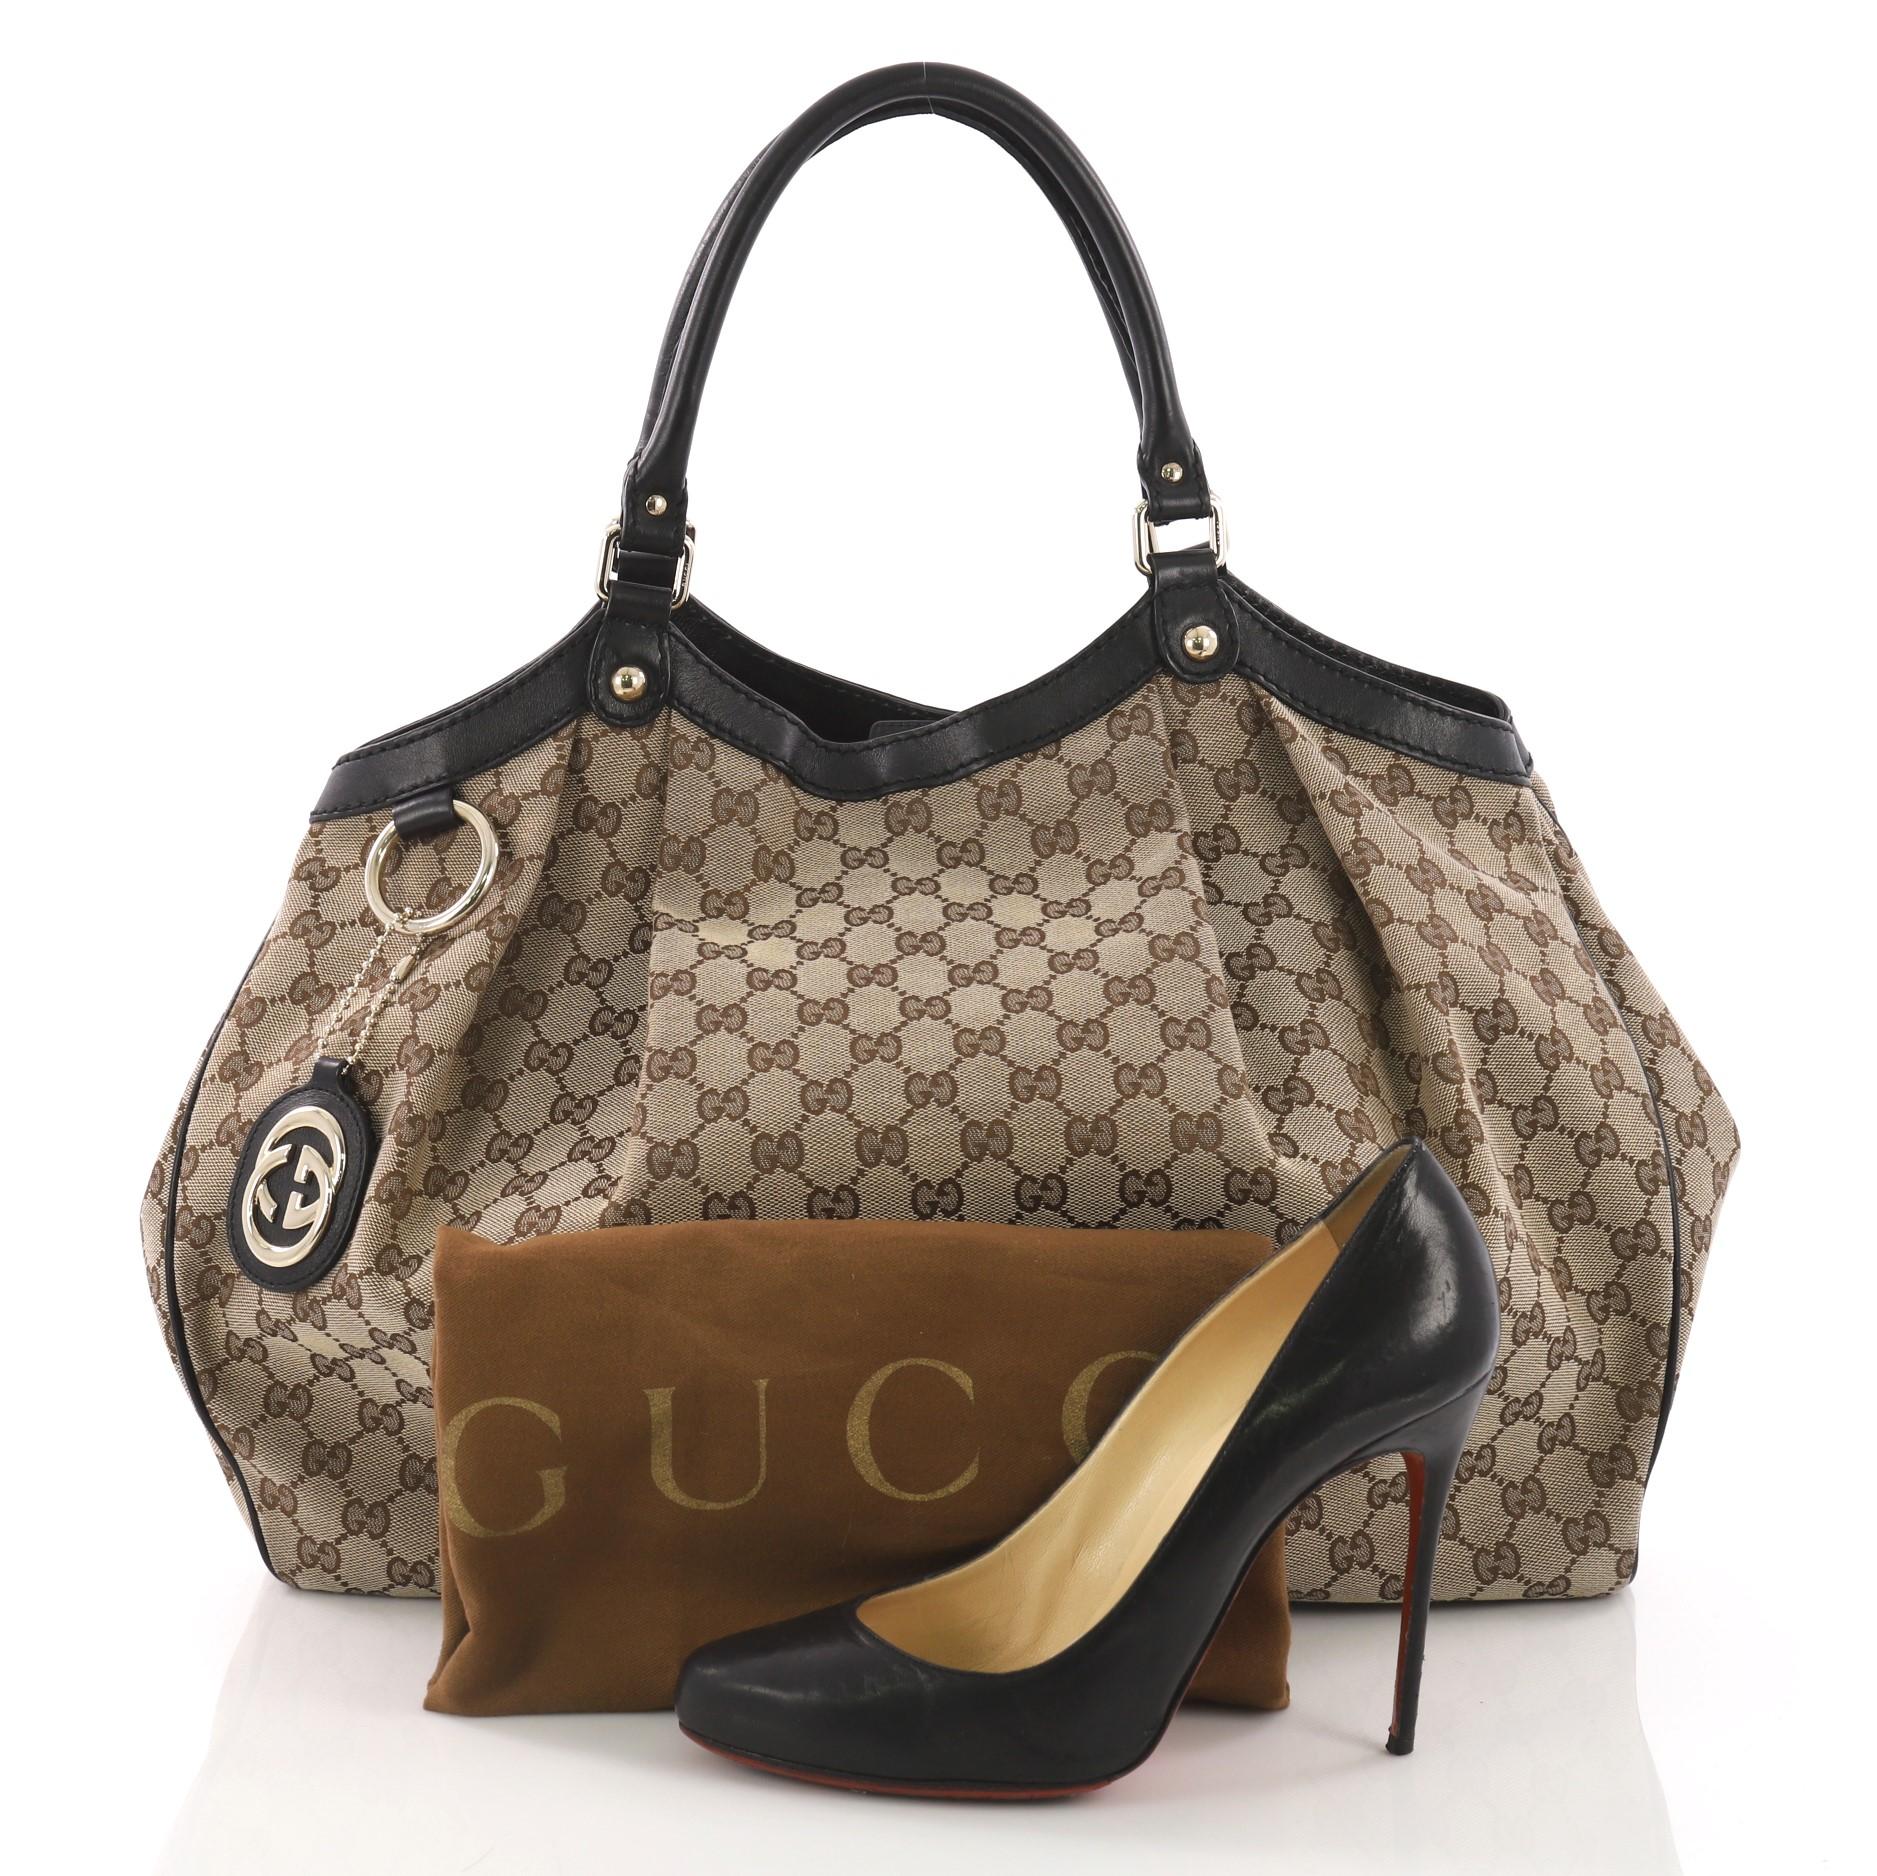 This Gucci Sukey Tote GG Canvas Large, crafted from brown GG canvas with leather trims, features dual rolled leather handles, ruched silhouette, and gold-tone hardware. Its side snap and magnetic closures opens to a brown fabric interior with zip